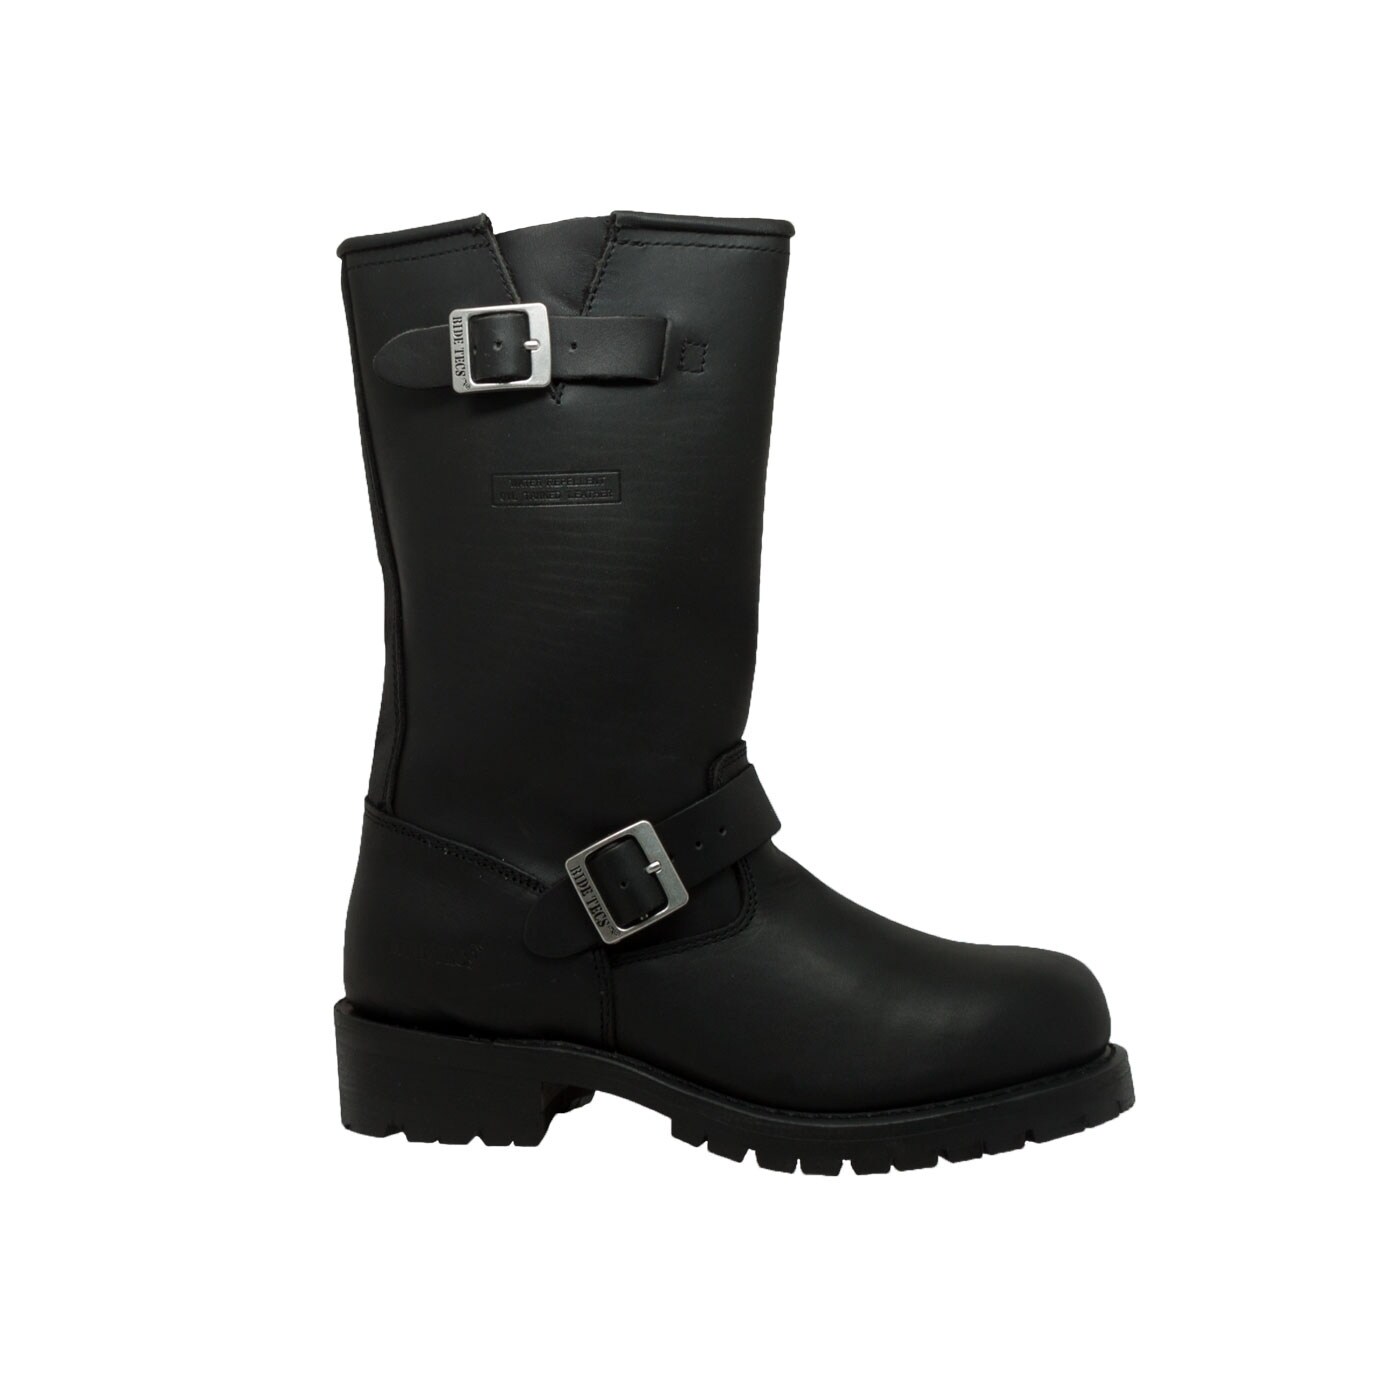 mens black leather boots